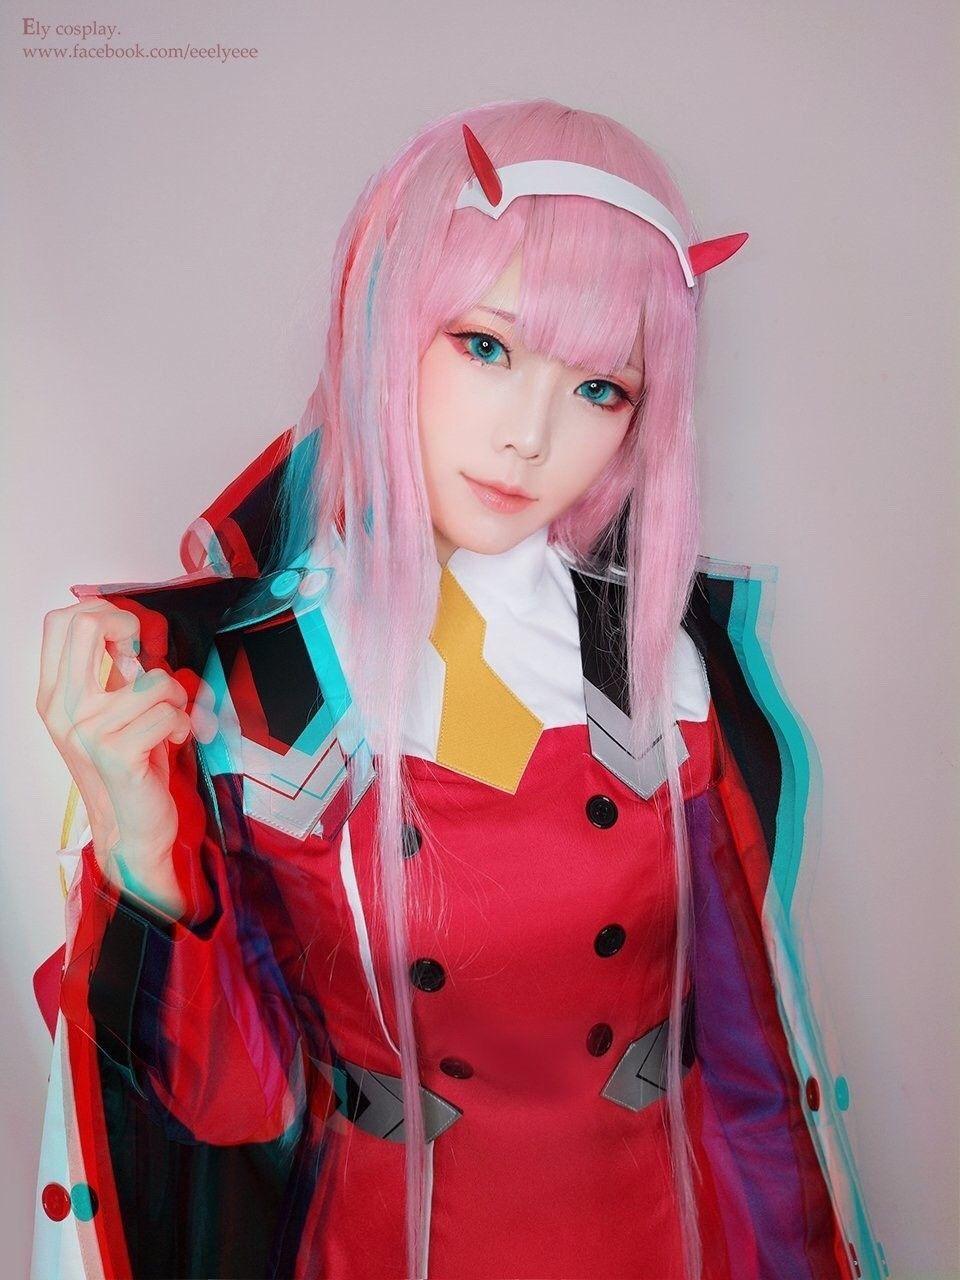 Ely Cosplay Two from Darling In The FRANXX. Cosplayers